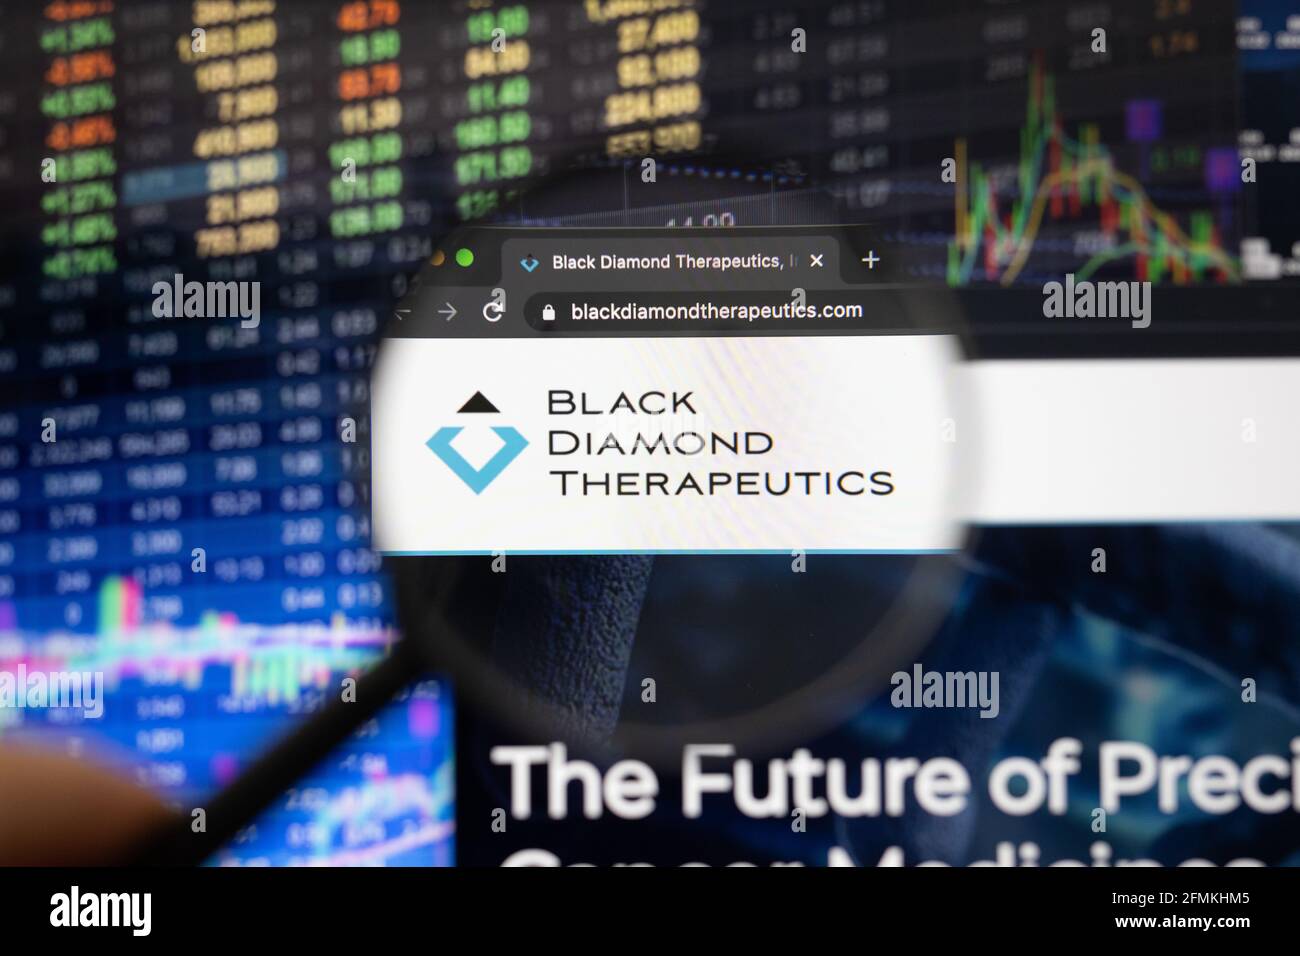 Black Diamond Therapeutic company logo on a website with blurry stock market developments in the background, seen on a computer screen Stock Photo